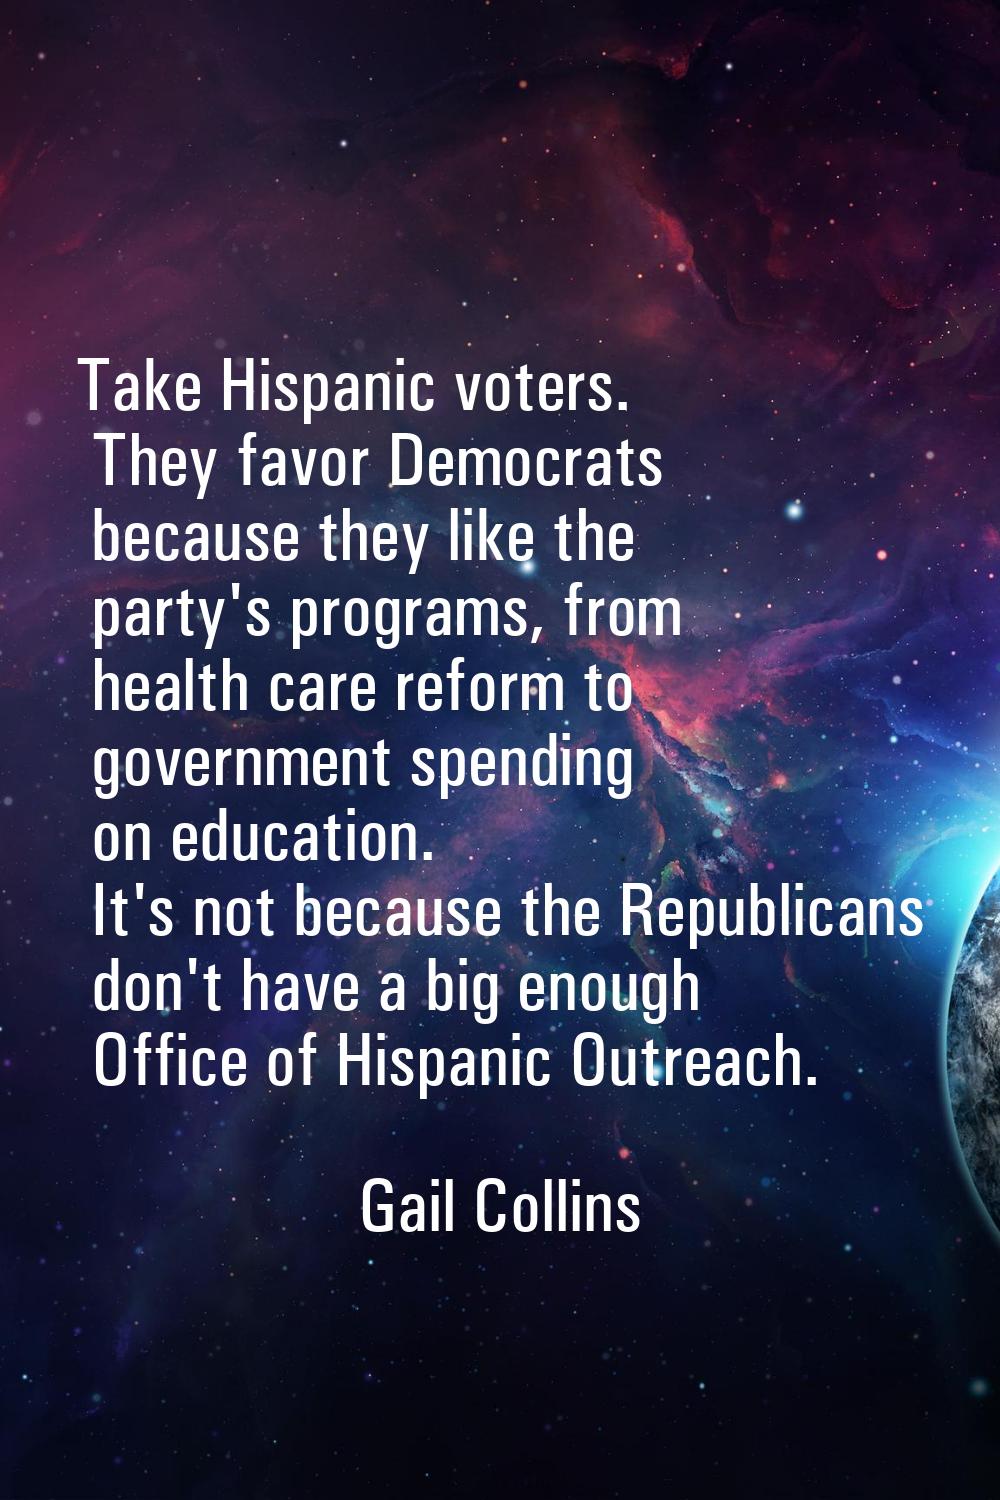 Take Hispanic voters. They favor Democrats because they like the party's programs, from health care